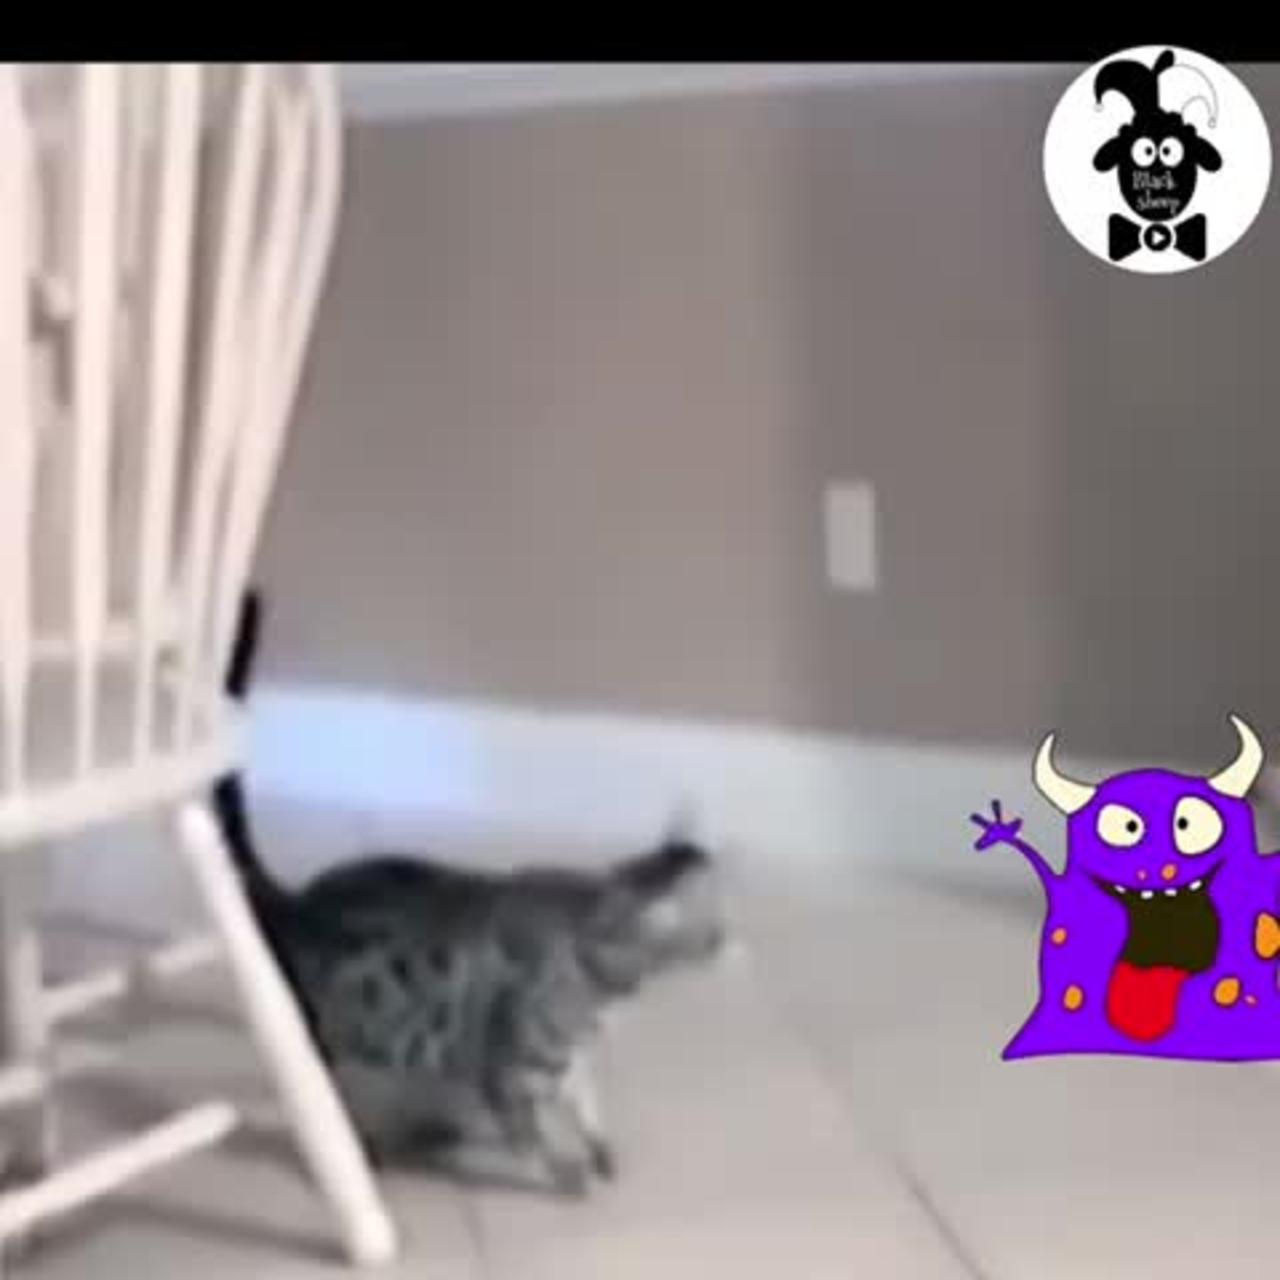 Cats getting scared by monsters 😂😹🤣